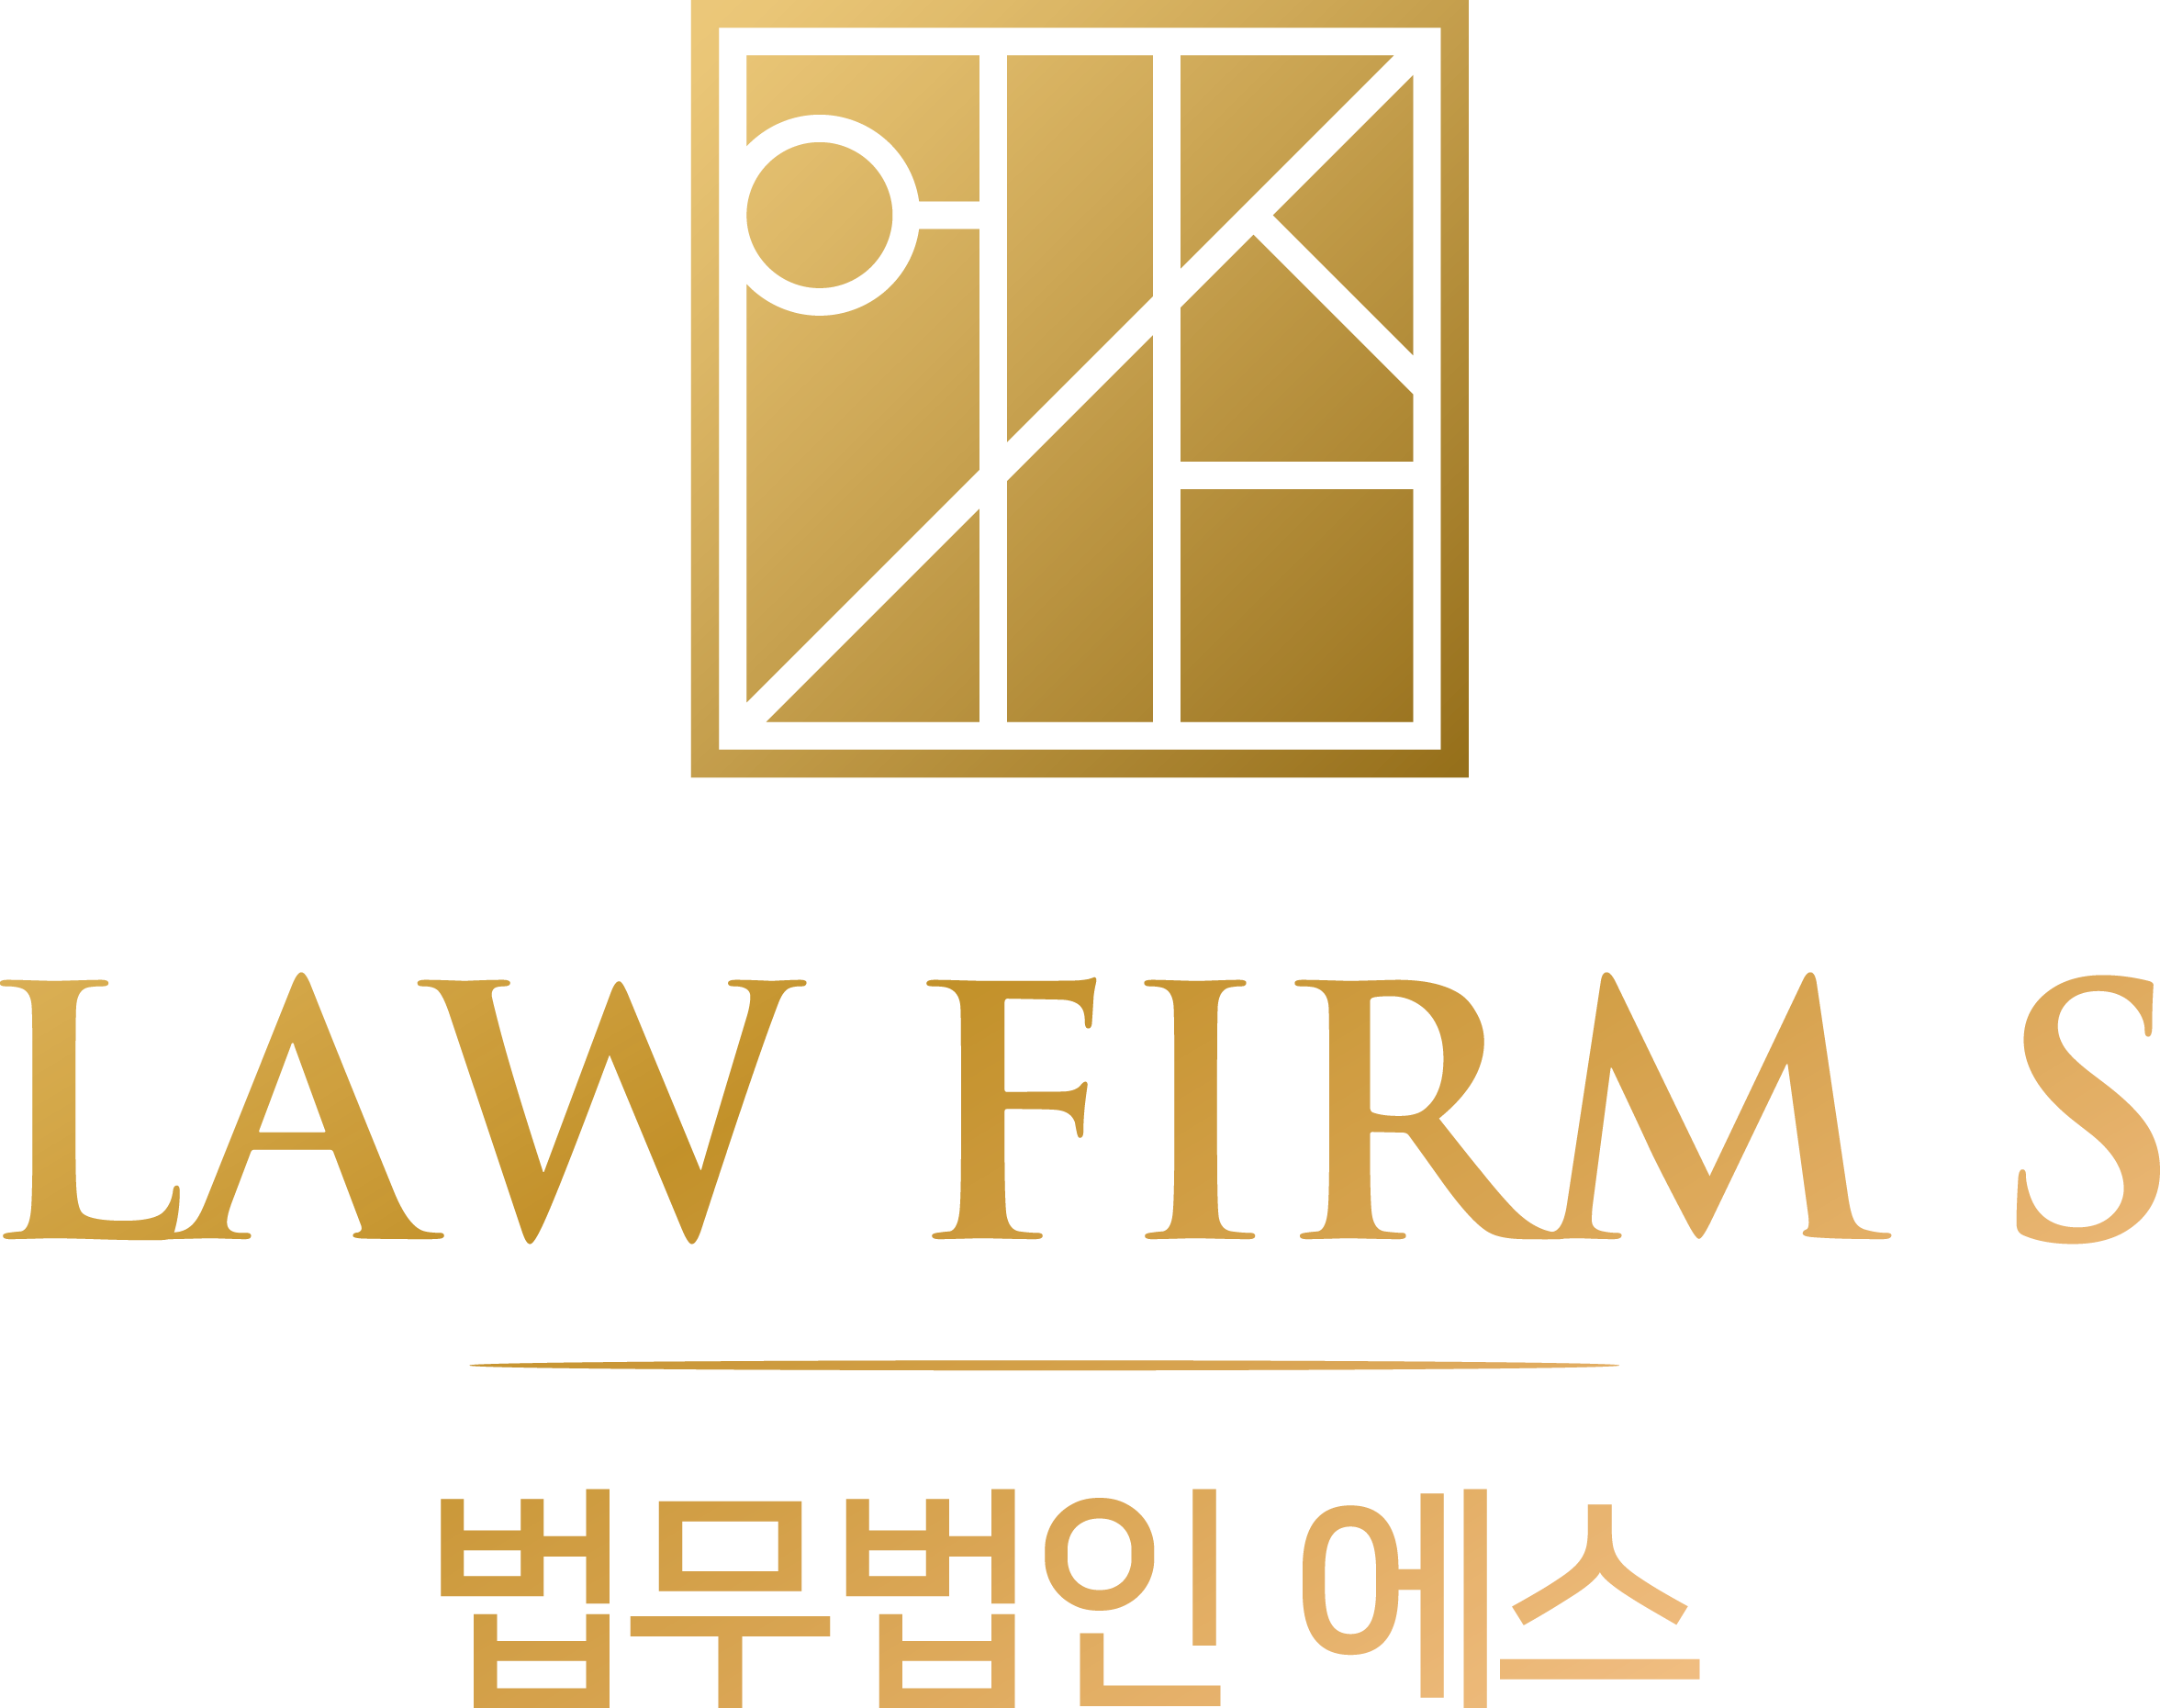 LAW FIRMS